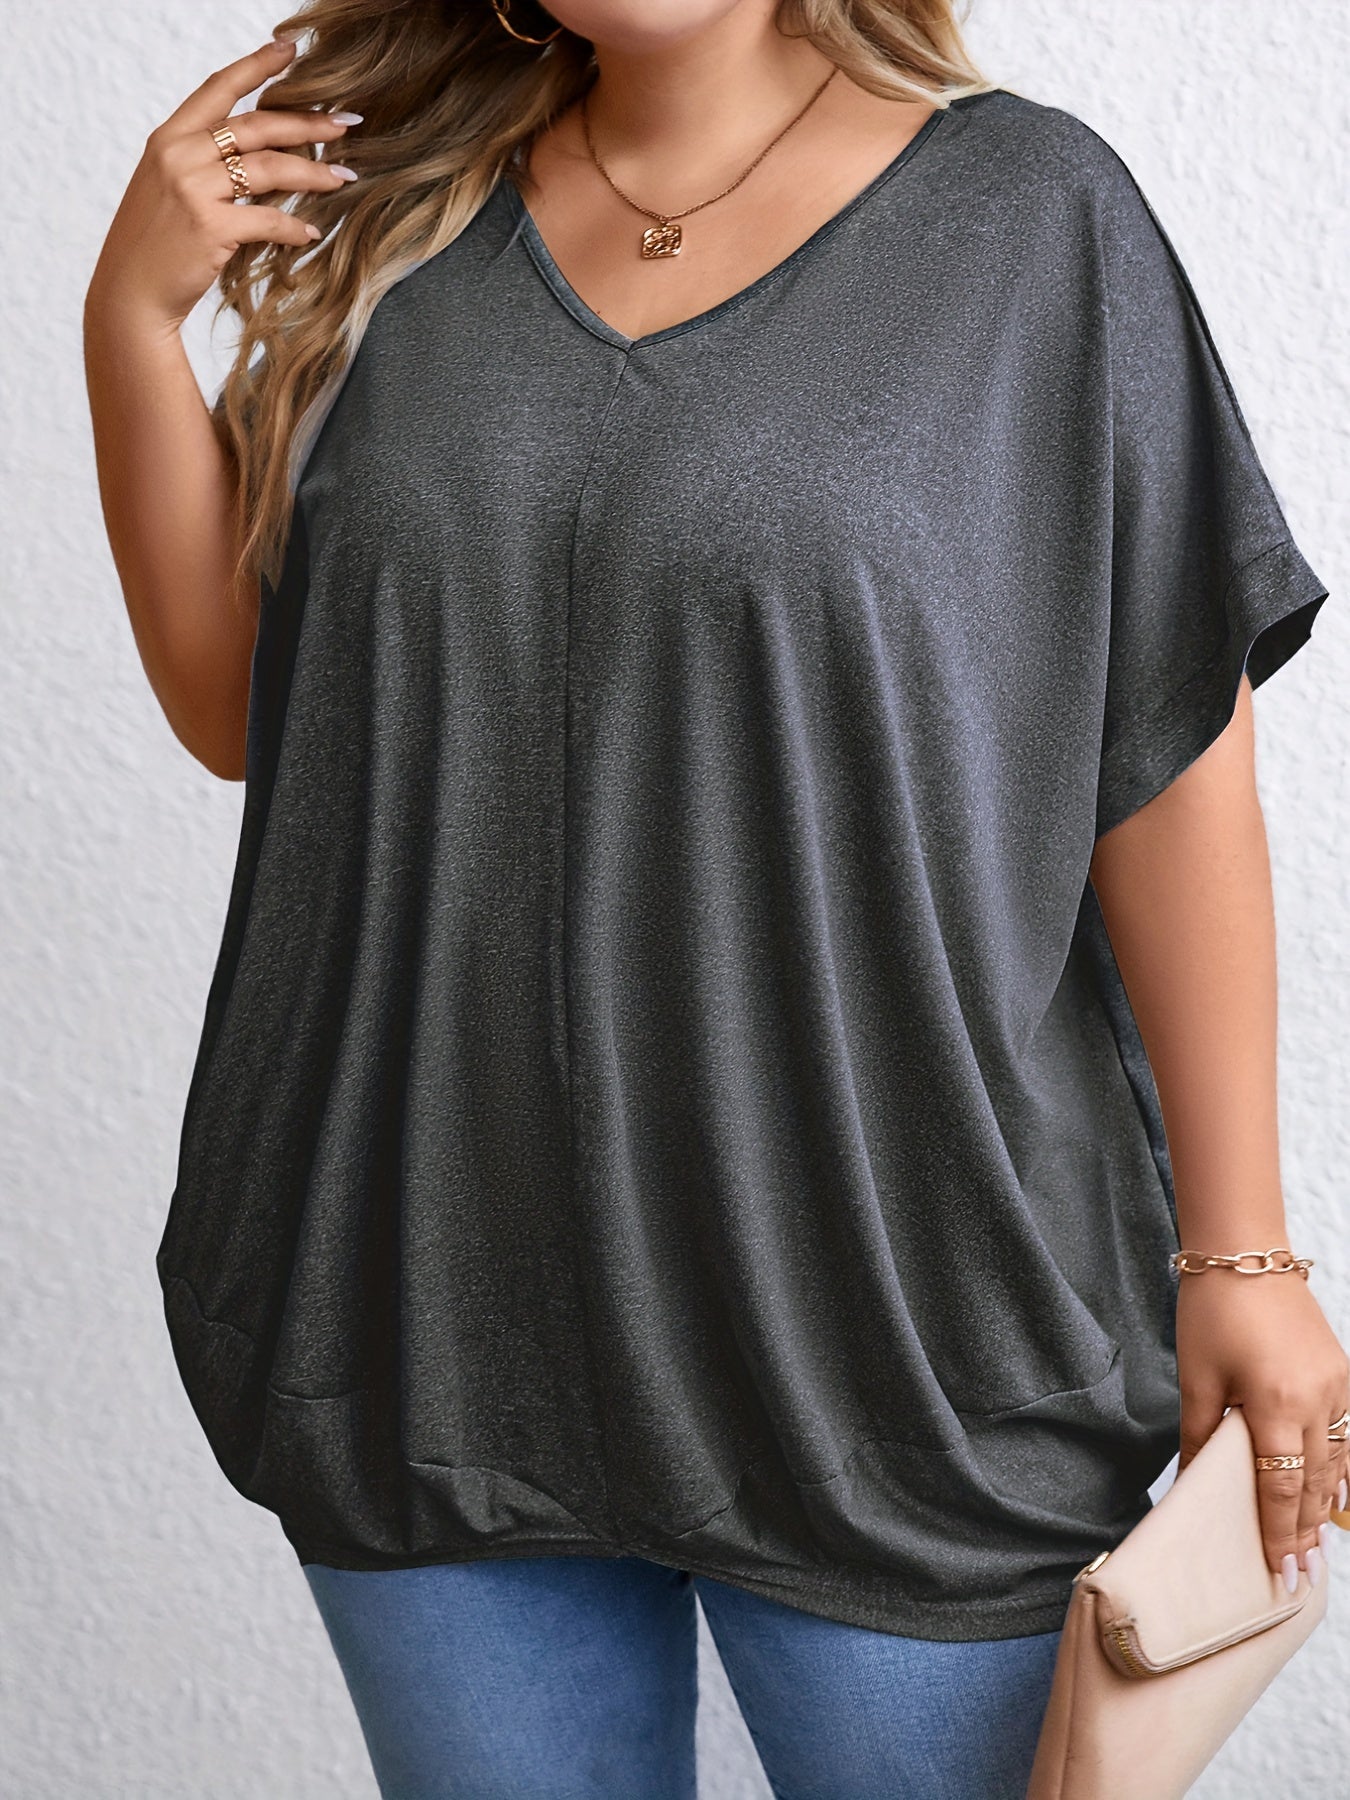 Plus Size Casual Top, Women's Plus Solid Bat Sleeve V Neck Ruched Asymmetrical Hem Oversized Tee